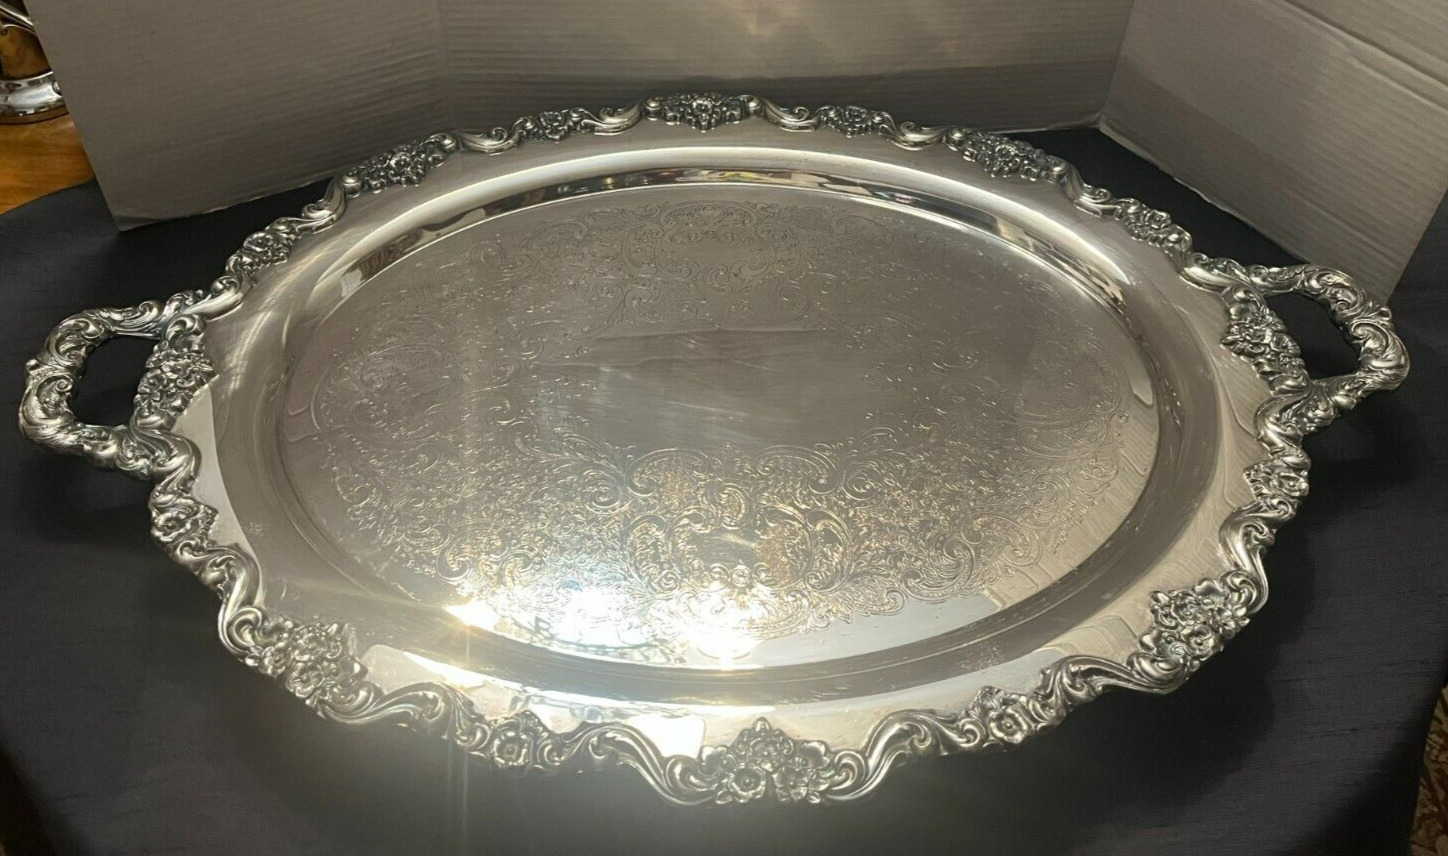 Vintage Towle Grand Duchess Footed Oversized Butler's Tray - #6955